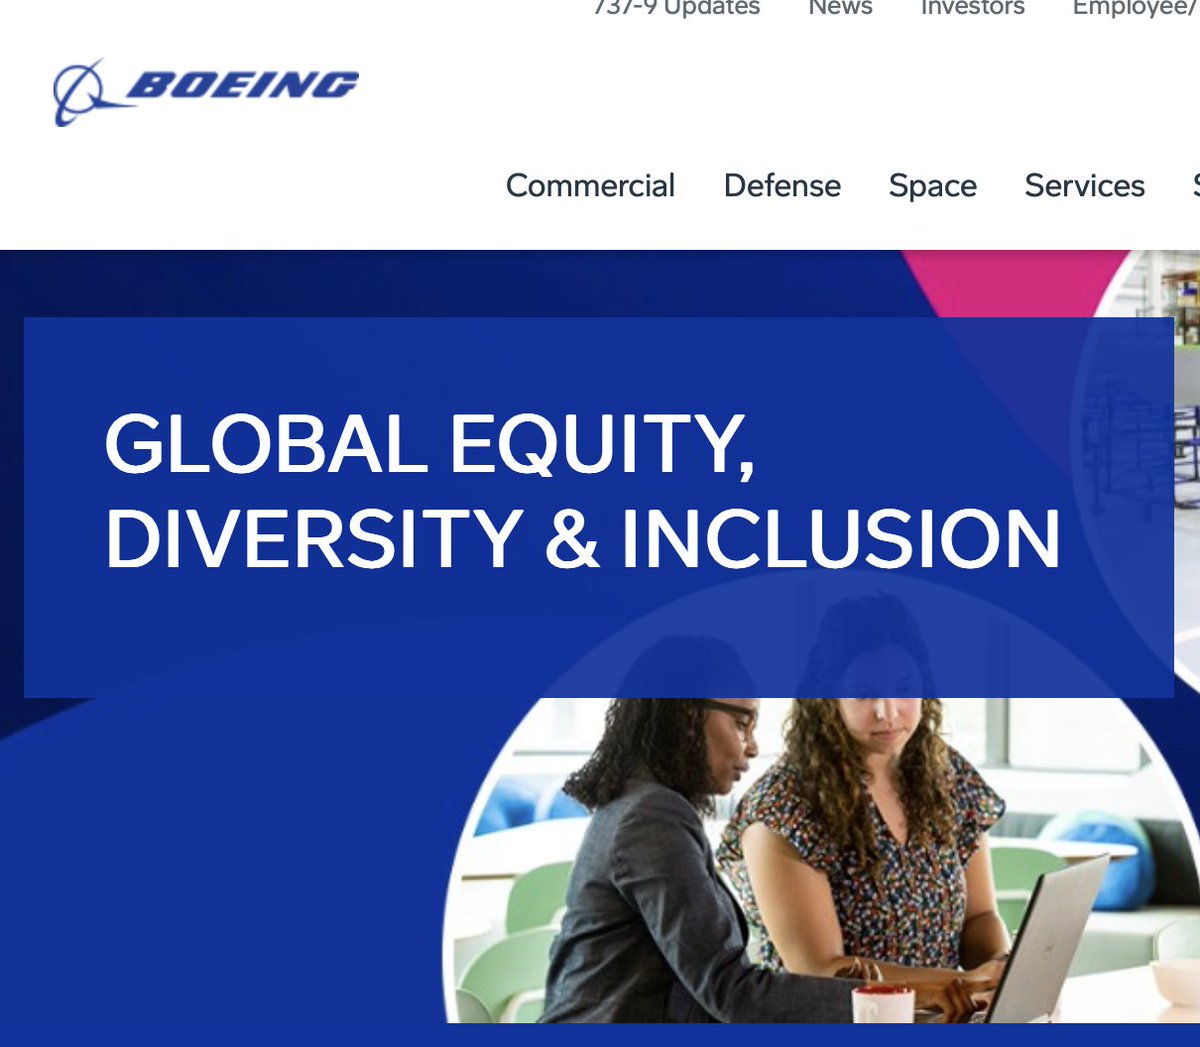 Seems like with @Boeing and @SouthwestAir so committed to DEI, these things shouldn't be happening, right? I mean, can't they just have everyone identify as competent and good at their jobs? That's how it works, right?